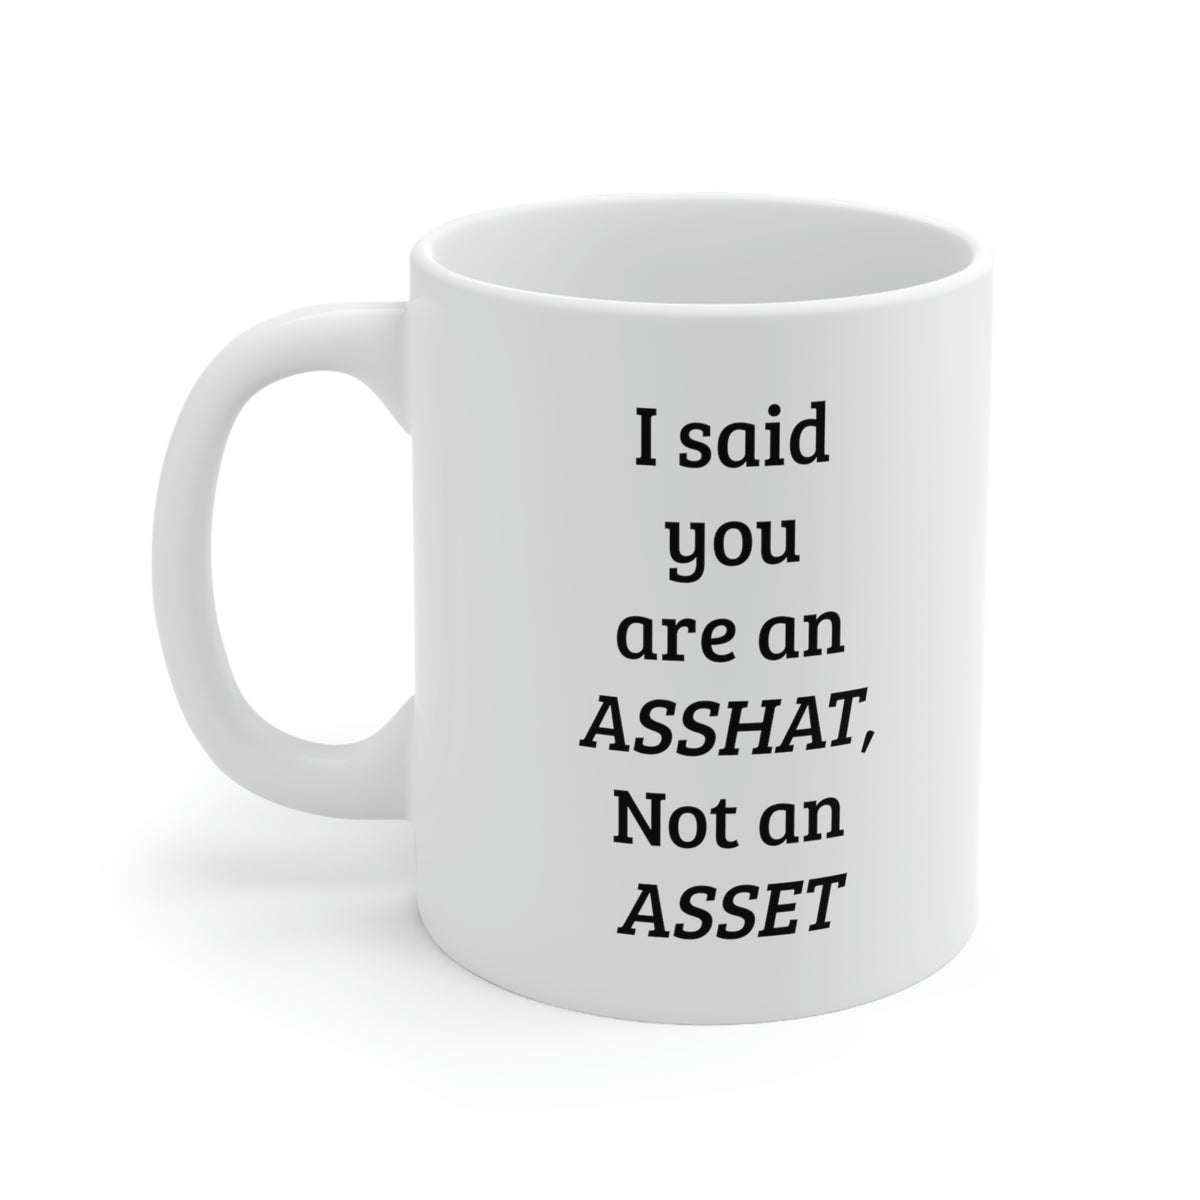 Accountant Mug - I said you are an asshat, Not an asset Coffee Cup - Funny Tax Accounting Christmas and Sarcasm For Men Women Coworker Friend